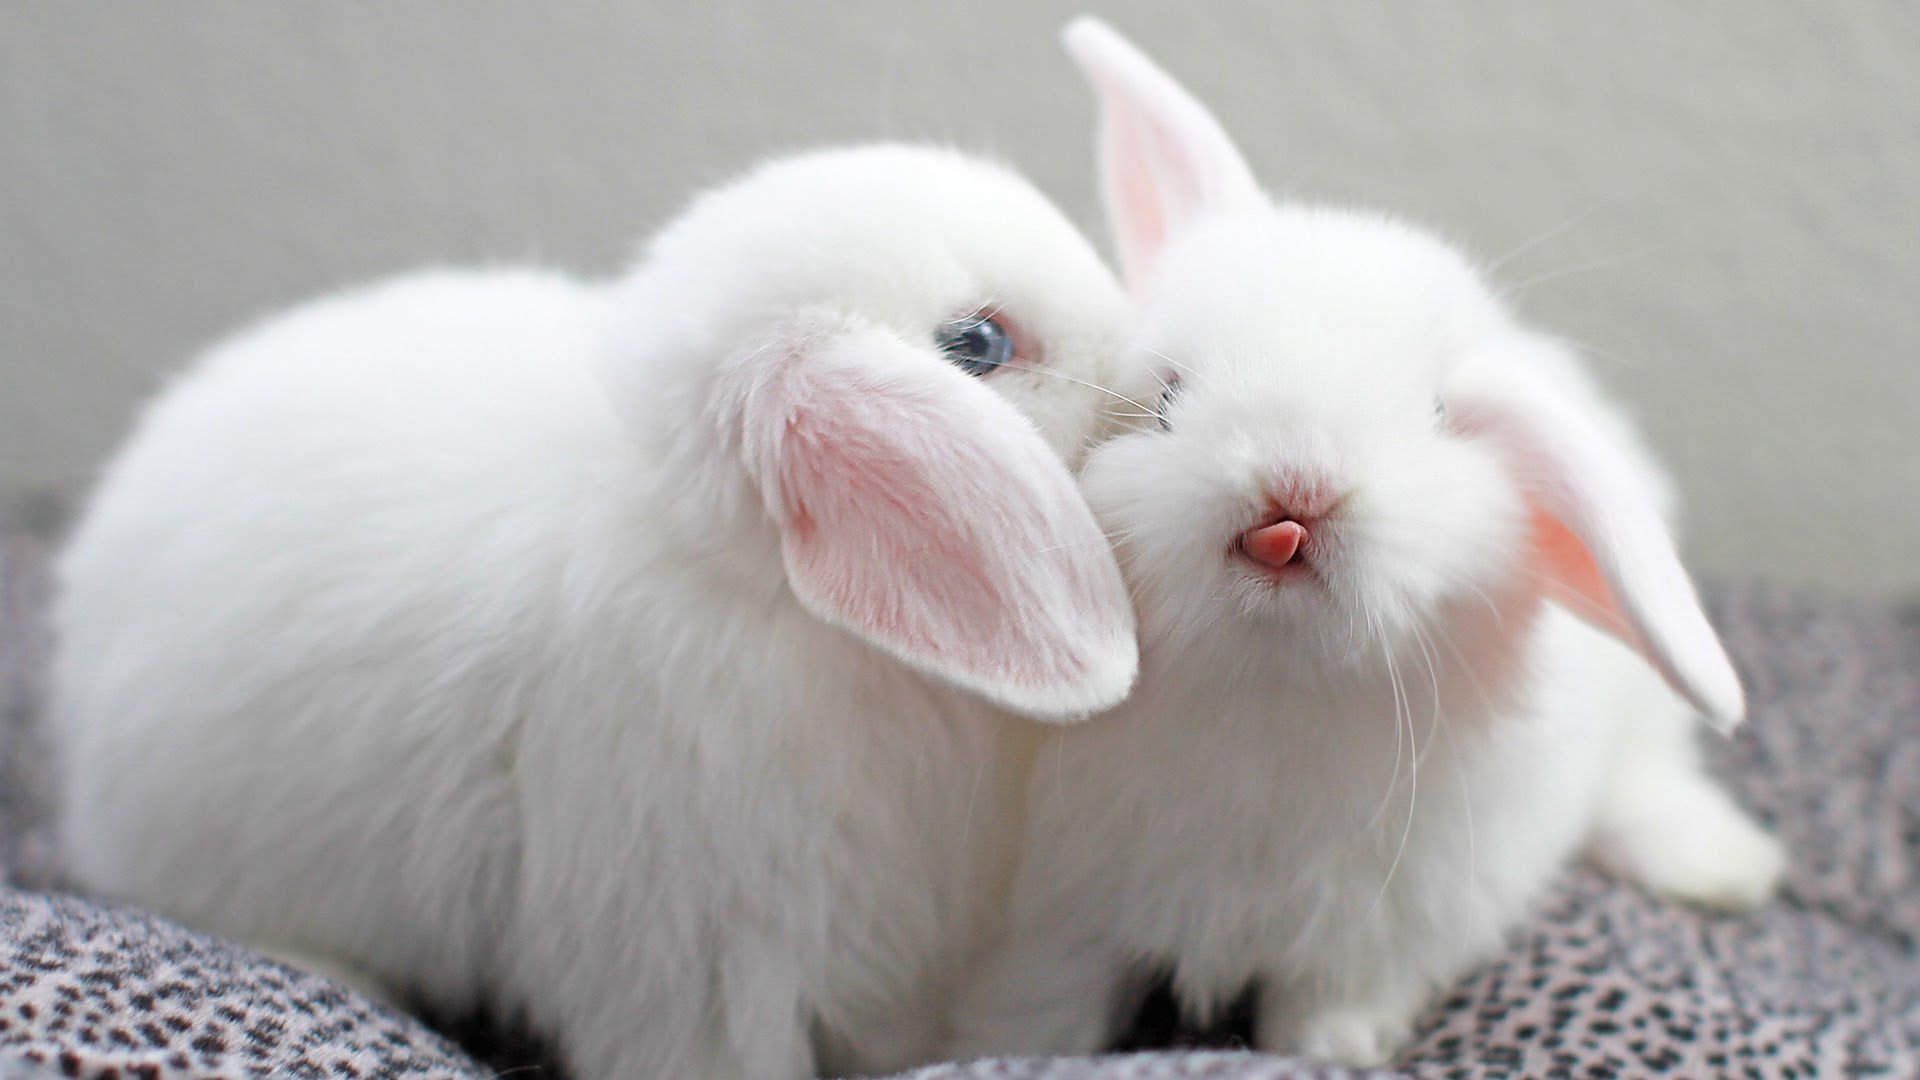 Hq Resolution Cute Bunny - Cute Rabbit Images Hd , HD Wallpaper & Backgrounds